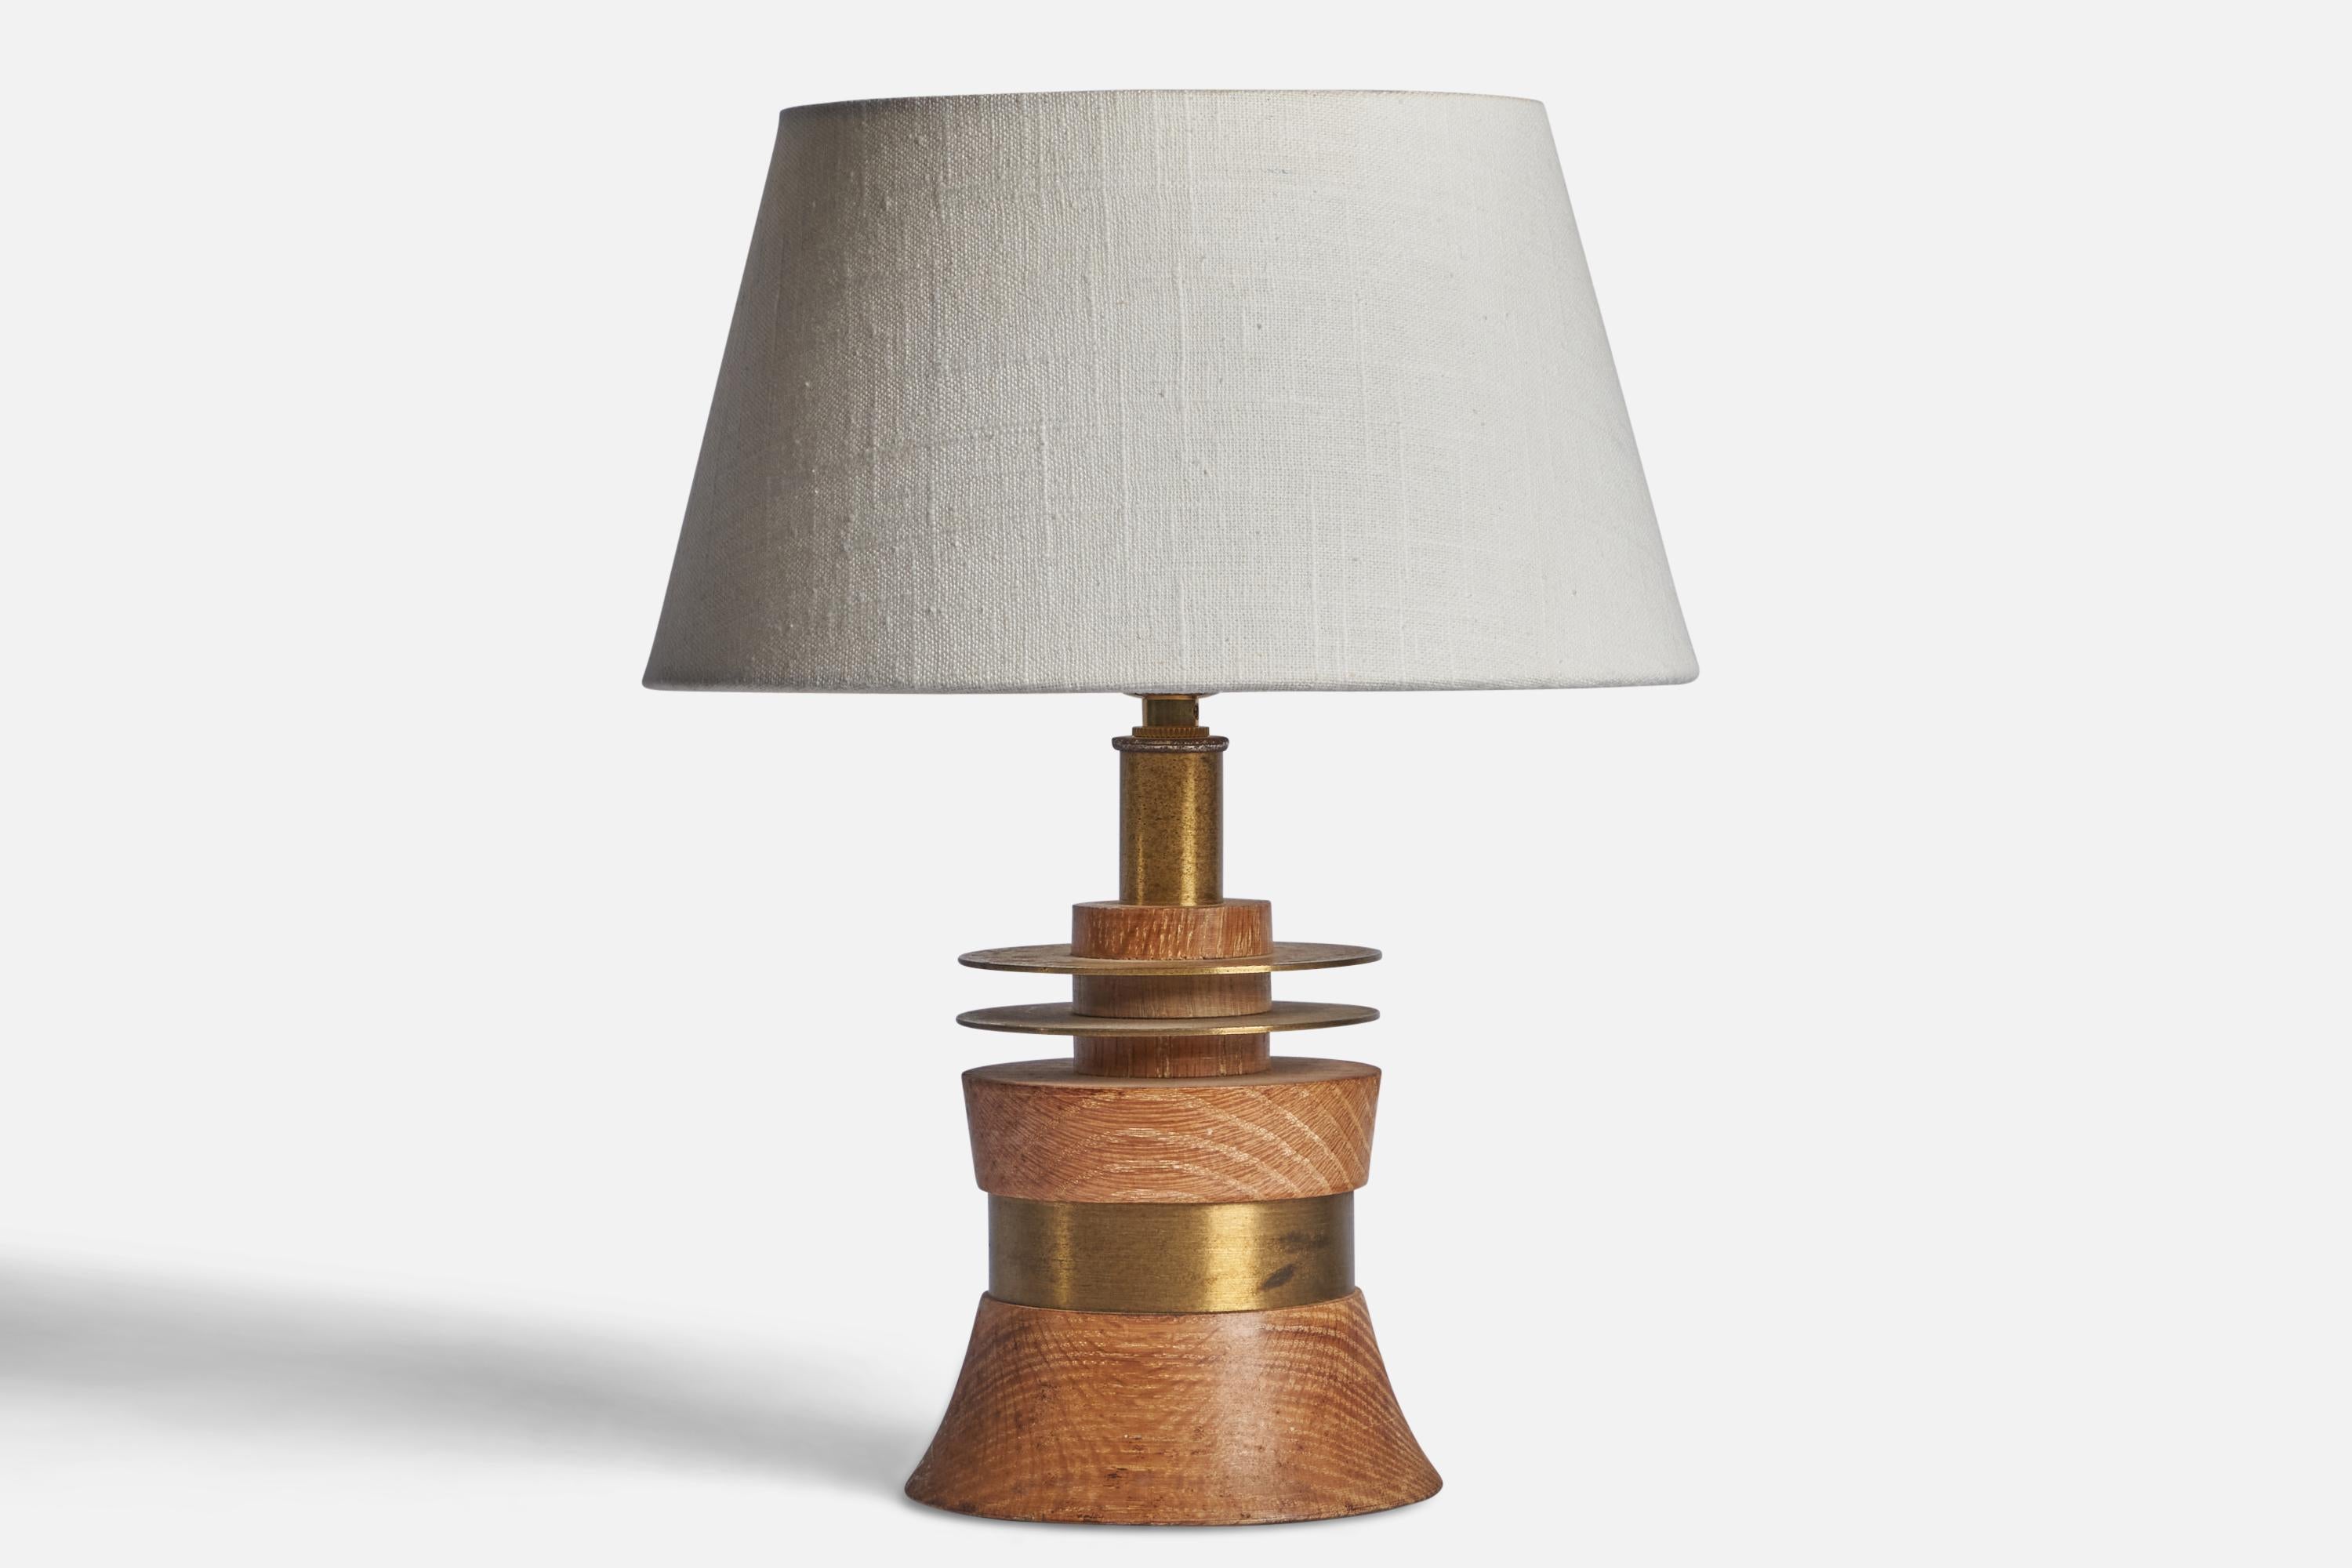 A brass and oak table lamp designed and produced in the US, 1950s.

Dimensions of Lamp (inches): 10” H x 5.15” Diameter
Dimensions of Shade (inches): 7” Top Diameter x 10” Bottom Diameter x 5.5” H 
Dimensions of Lamp with Shade (inches): 13.25” H x